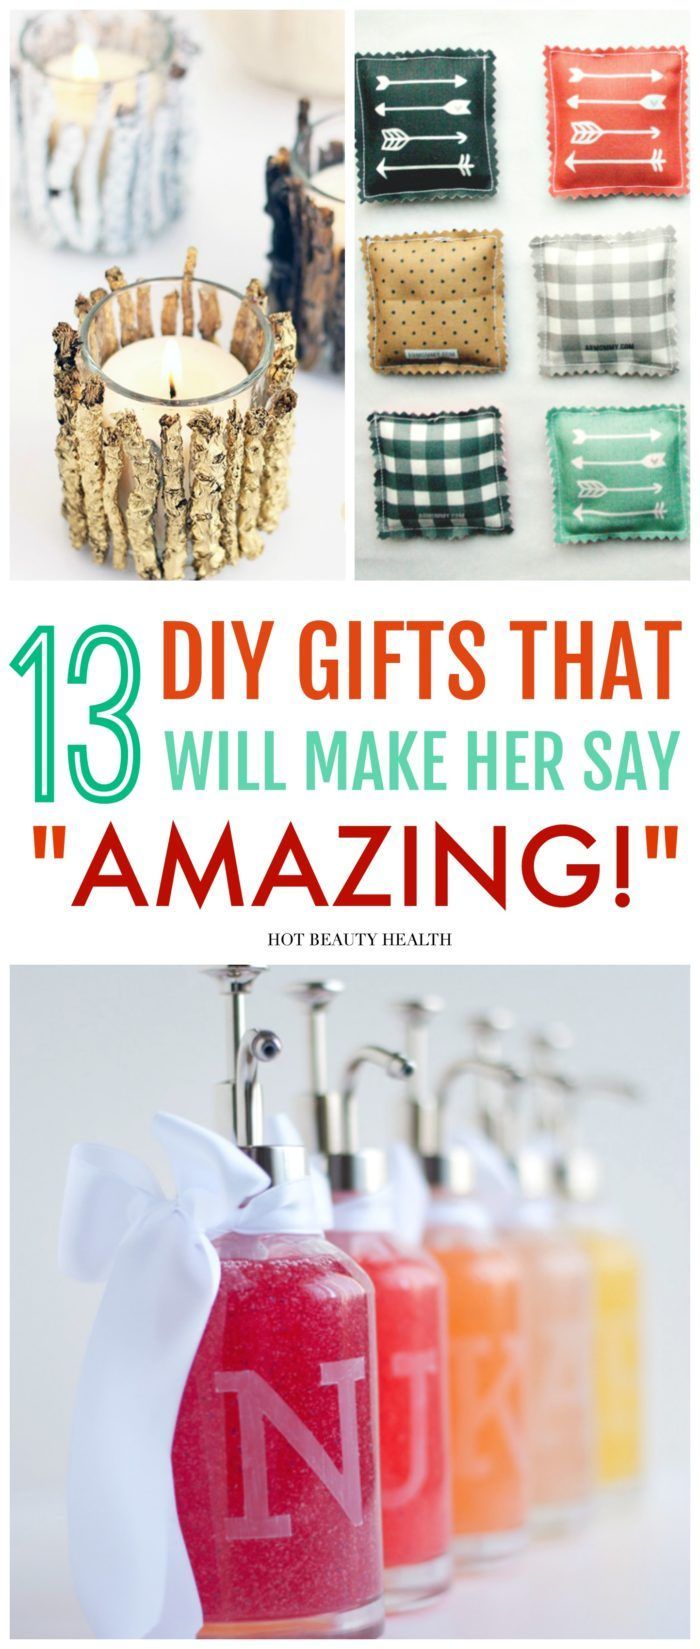 13 Amazing DIY Christmas Gift Ideas People Actually Want -   16 diy projects For Mom life ideas